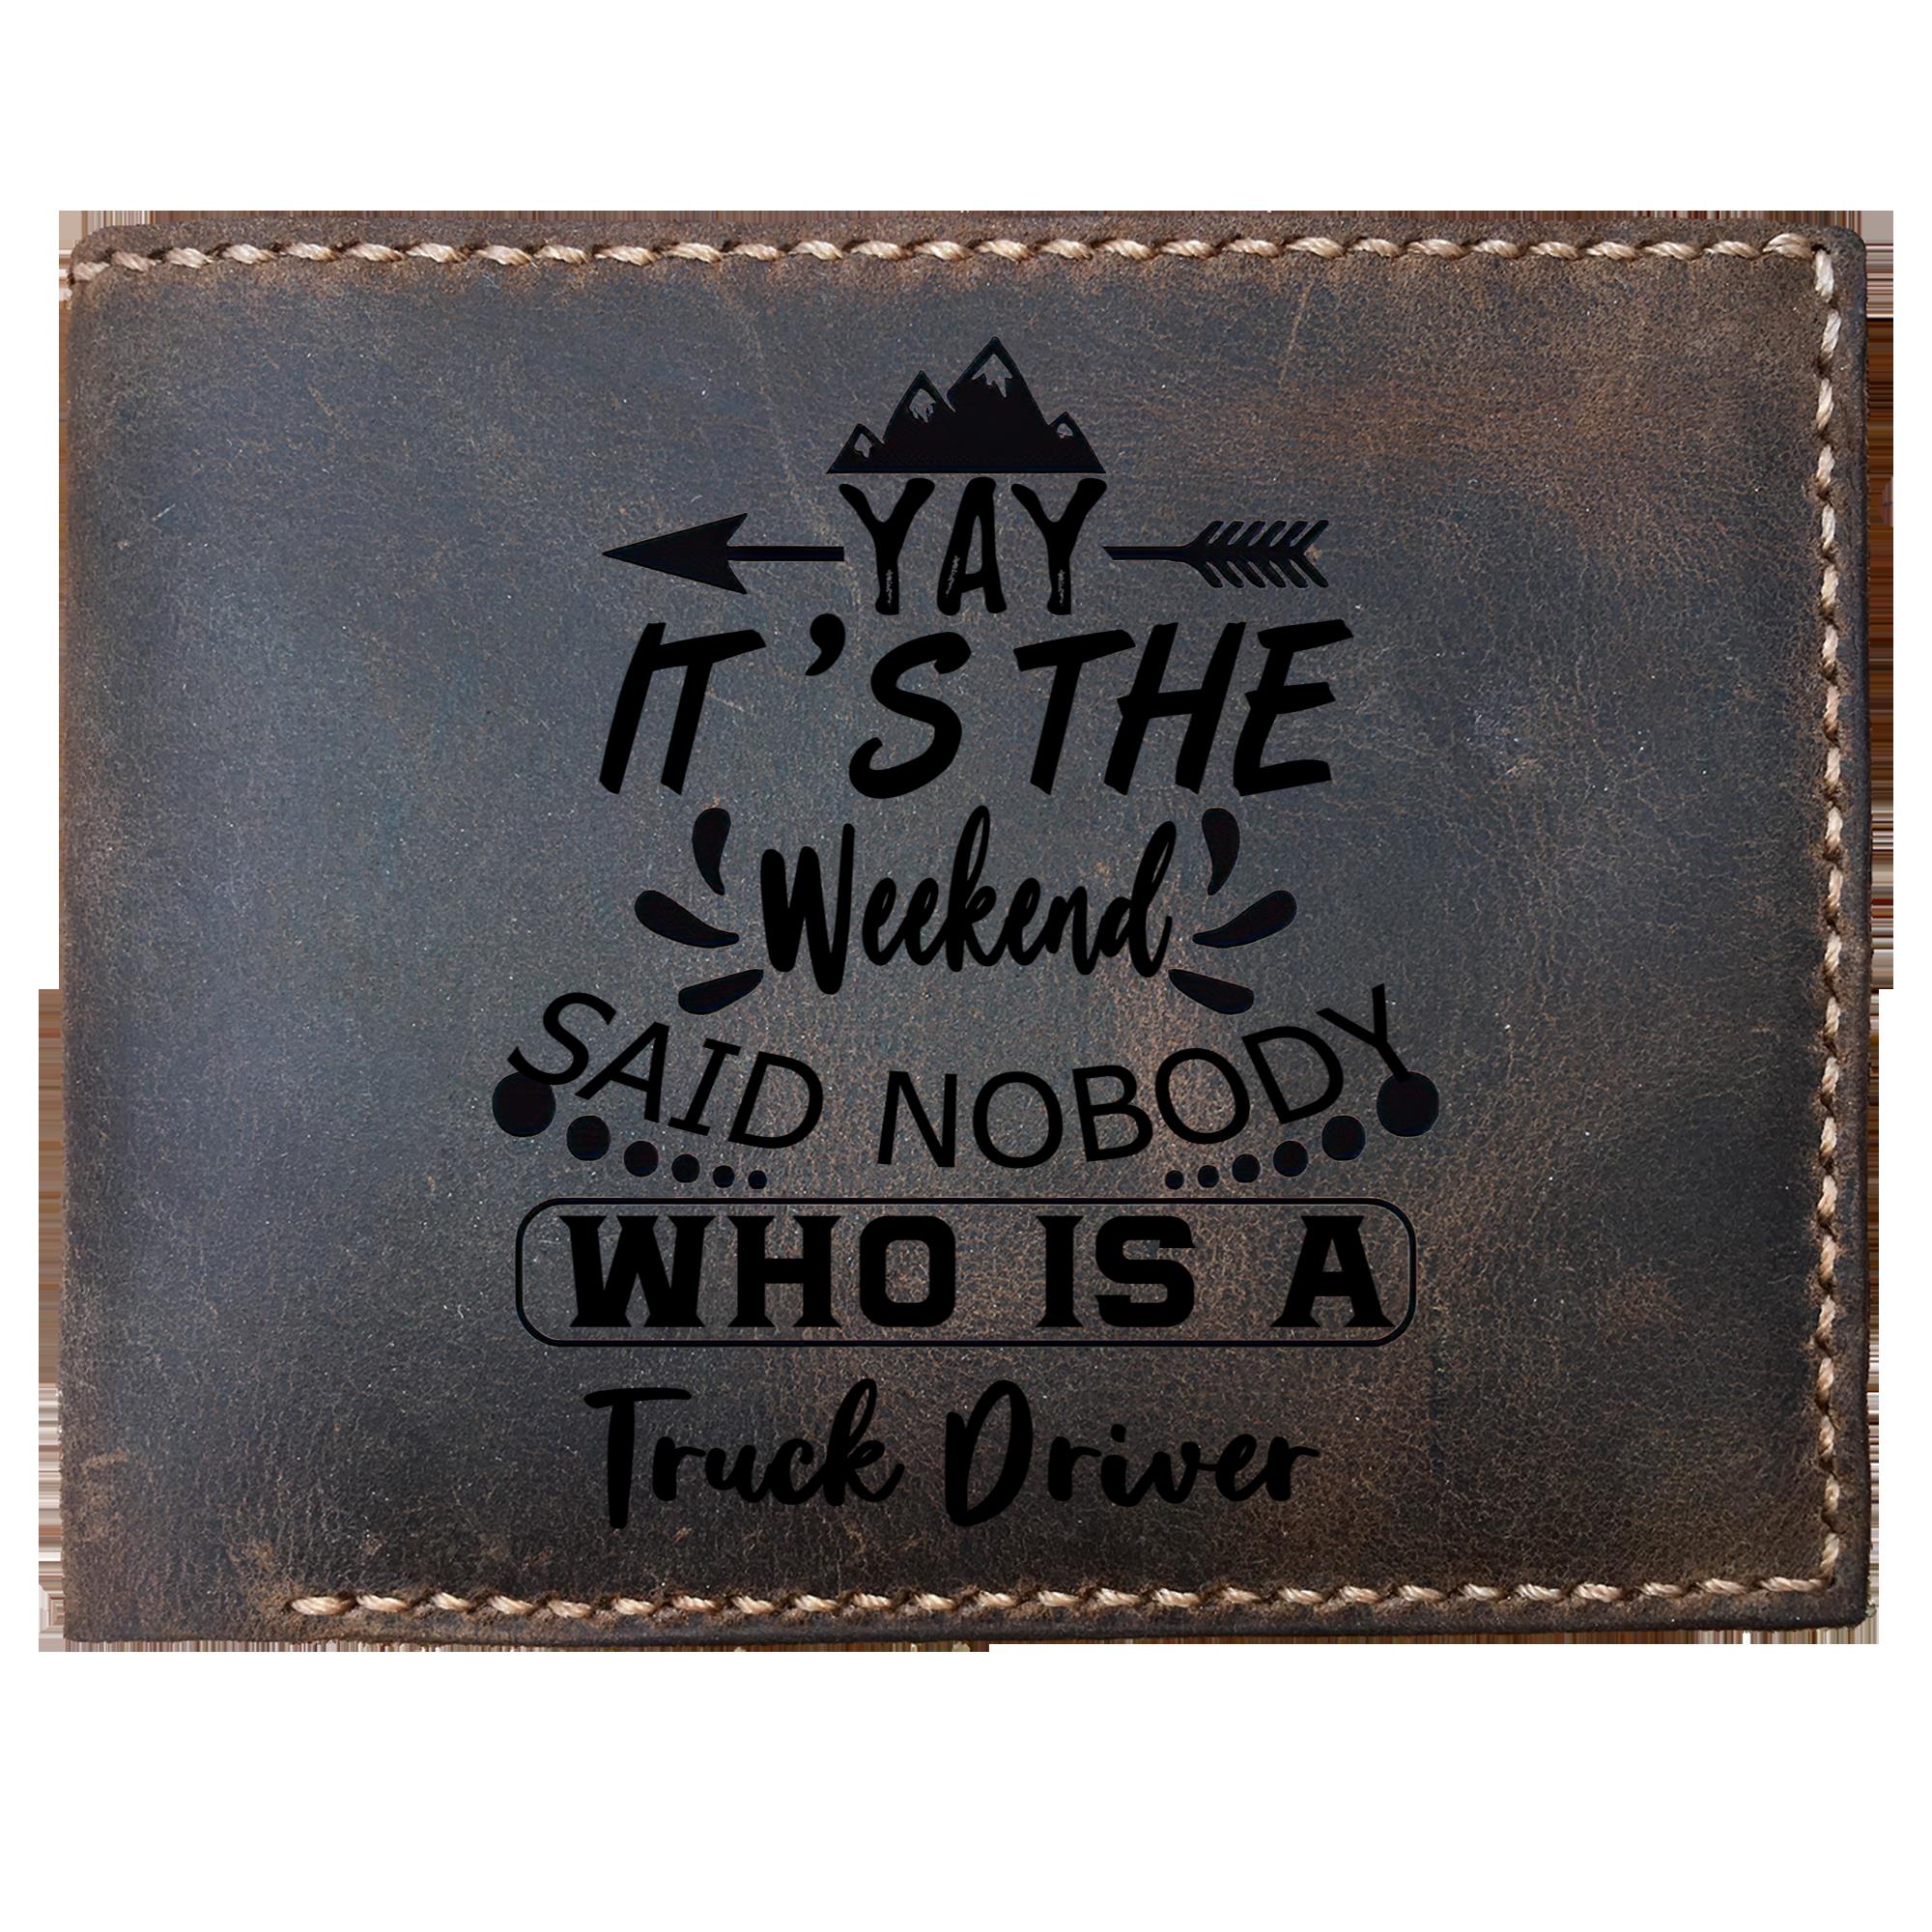 Skitongifts Funny Custom Laser Engraved Bifold Leather Wallet For Men, It's The Weekend Said Nobody Who Is A Truck Driver, Father's Day Gifts